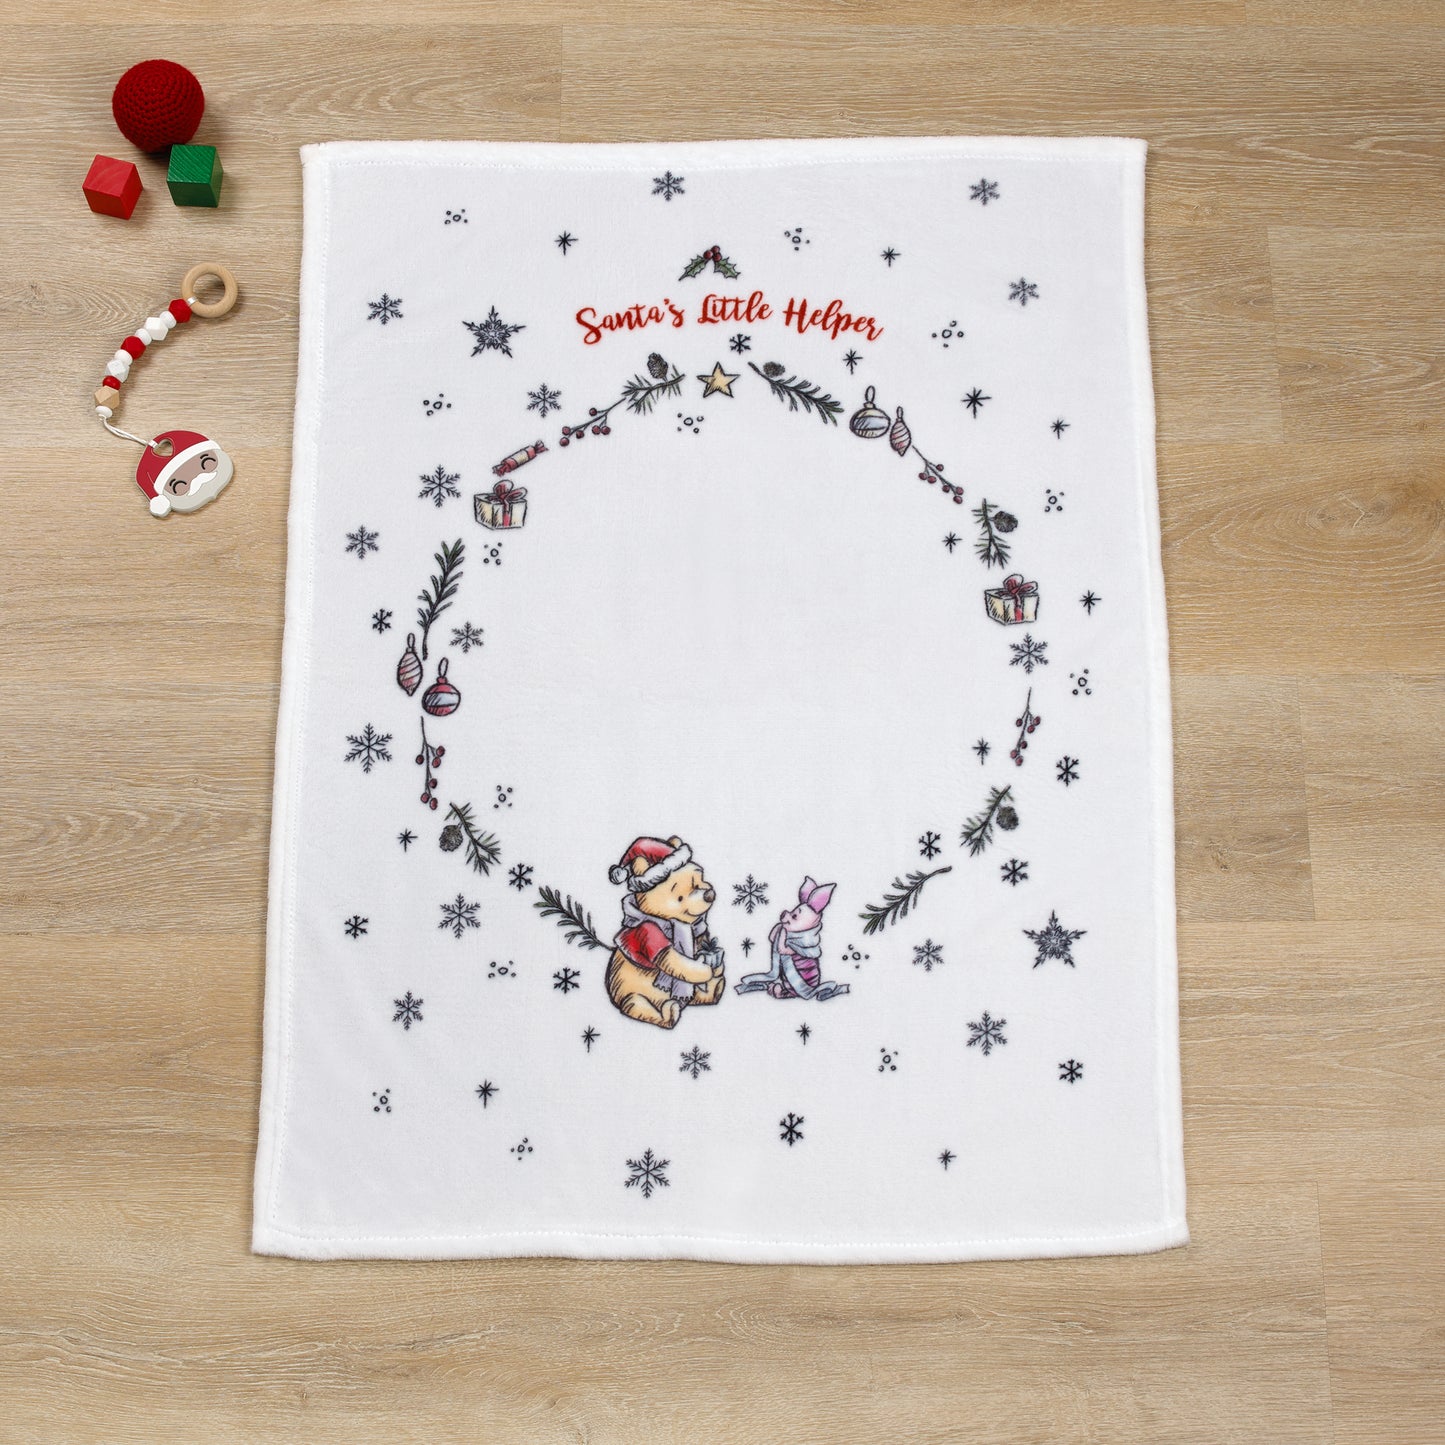 Disney Winnie the Pooh and Piglet White, Red, and Green Christmas Holiday Wreath "Santa's Little Helper" Photo Op Super Soft Baby Blanket